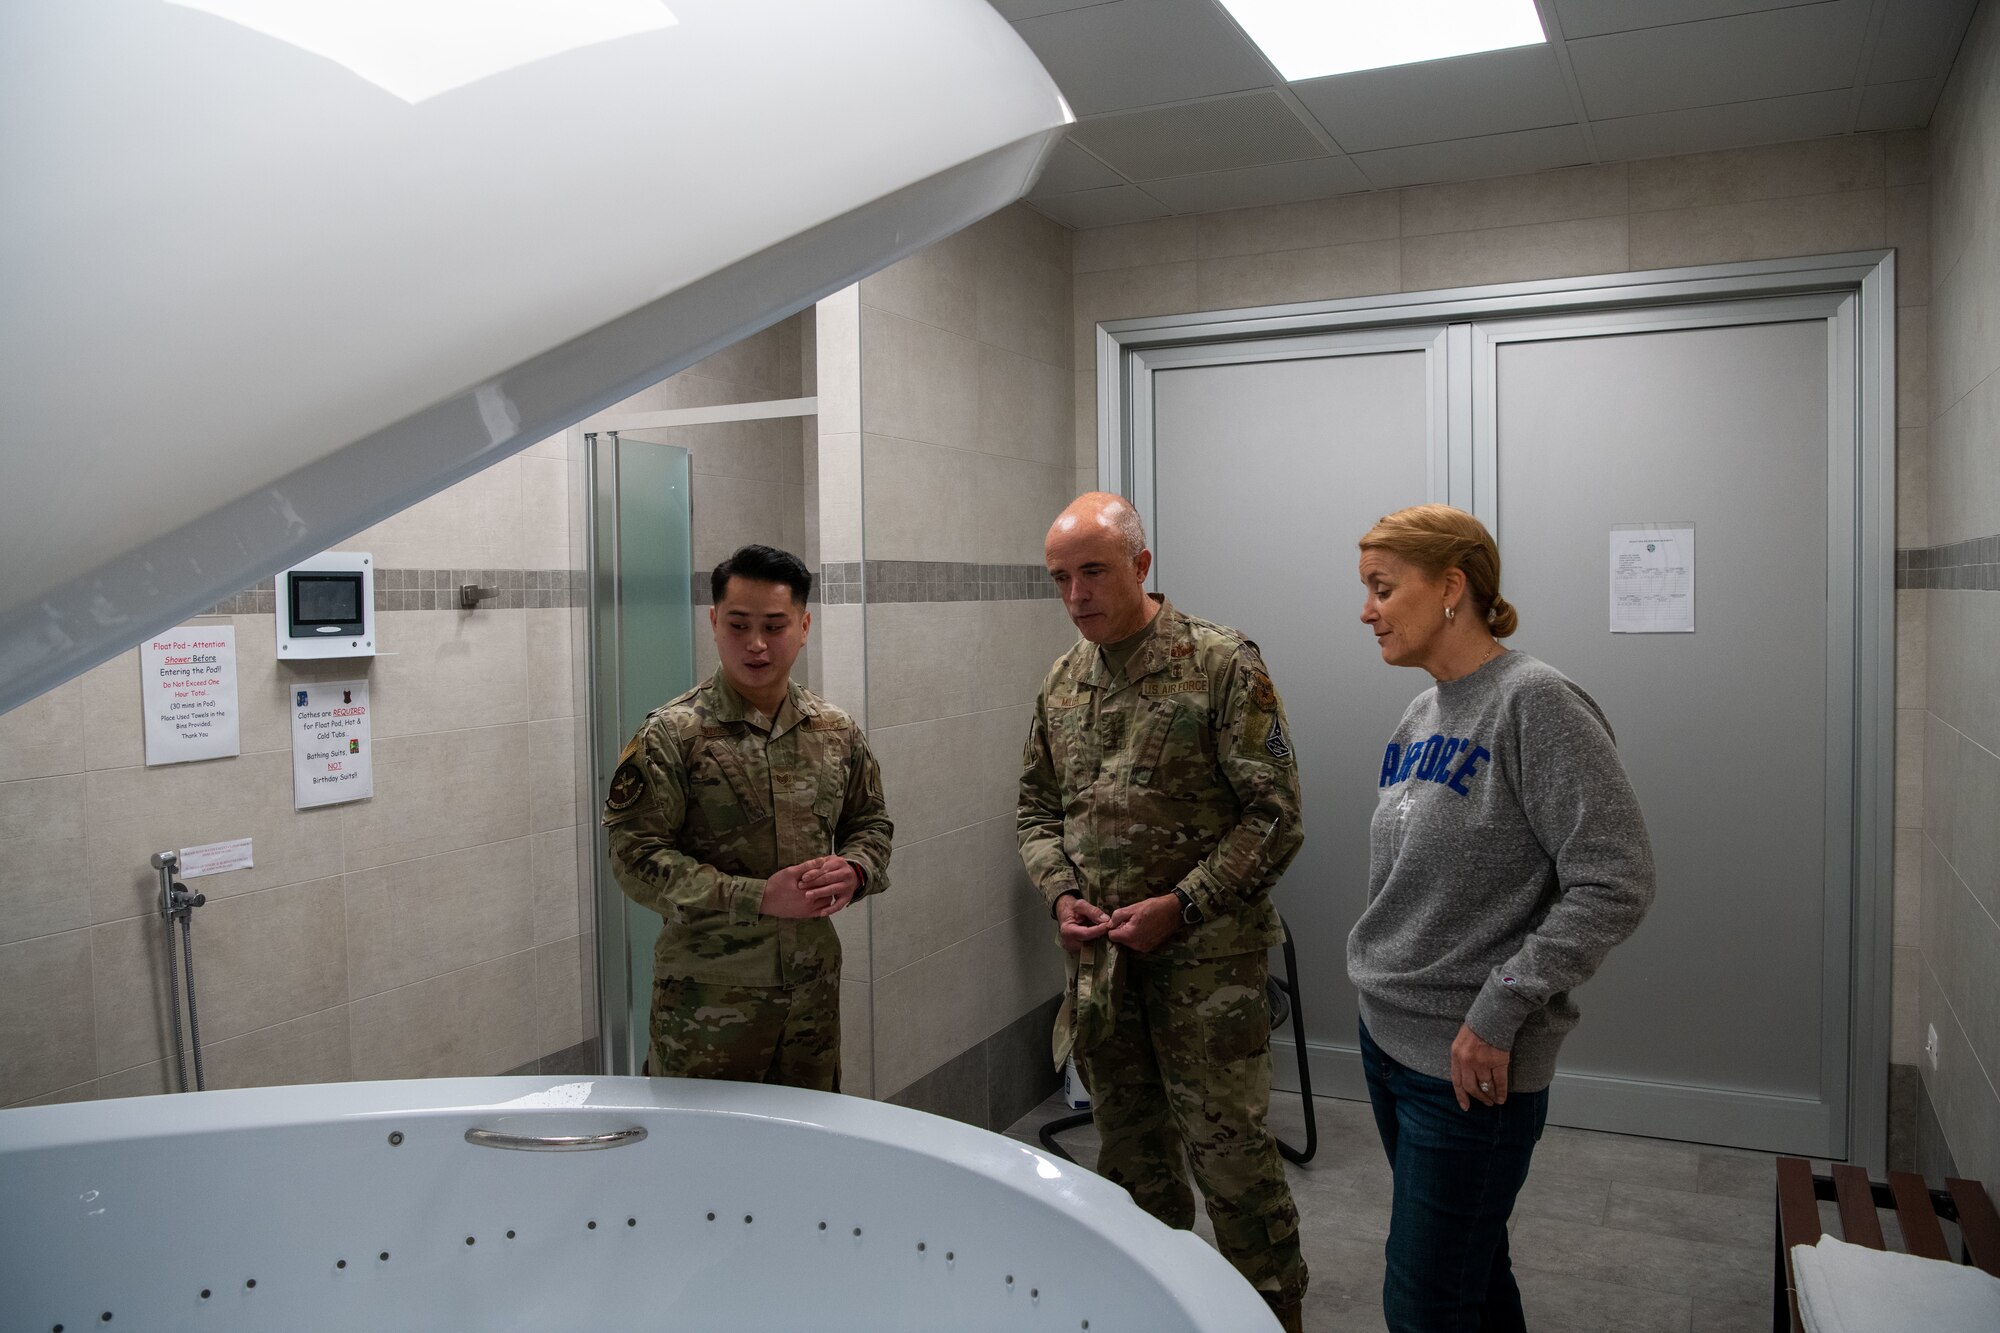 U.S. Air Force Lt. Gen. Robert Miller, Surgeon General of the Air Force, and Chief Master Sgt. Dawn Kolczynski, Medical Enlisted Force and Enlisted Corps Chief, visit the Cobra Clinic at Aviano Air Base, Italy, Nov. 9, 2022. The sensory deprivation tank at the clinic, is a dark, soundproof tank with a foot or less of salt where users float for therapeutic effects, both mental and physical. (U.S. Air Force photo by Airman 1st Class Thomas Calopedis)